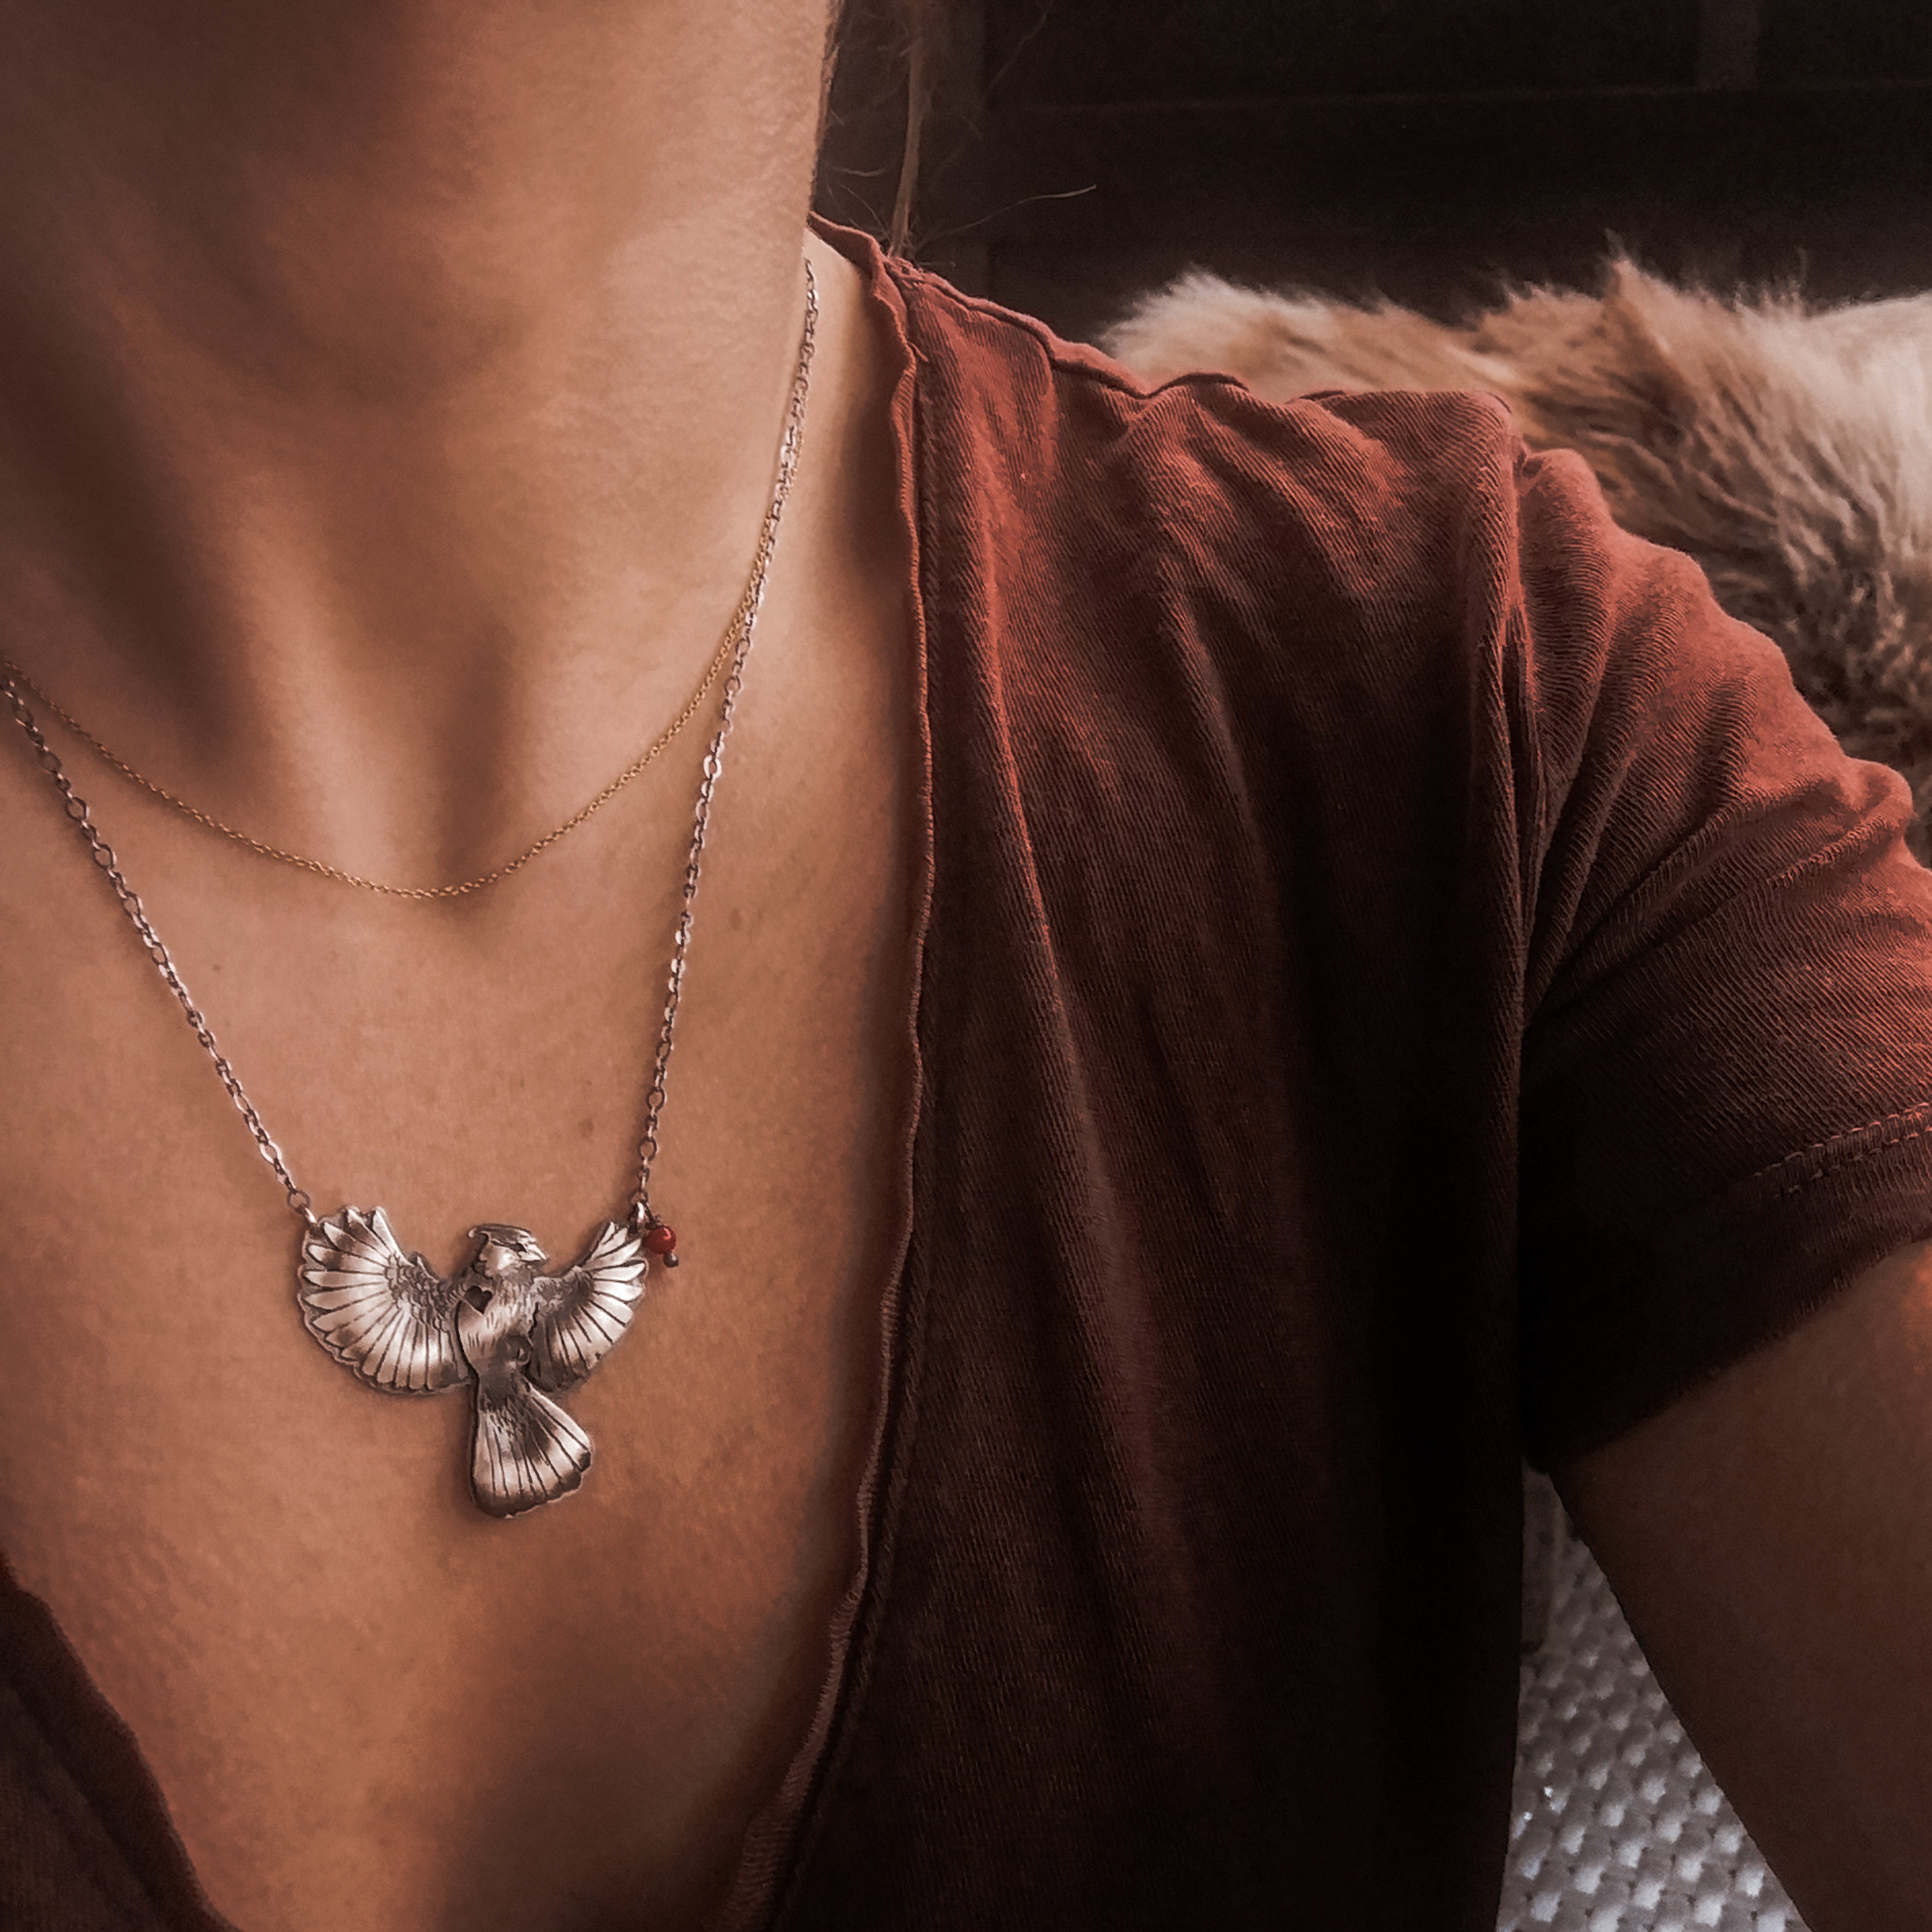 The Red Cardinal Necklace